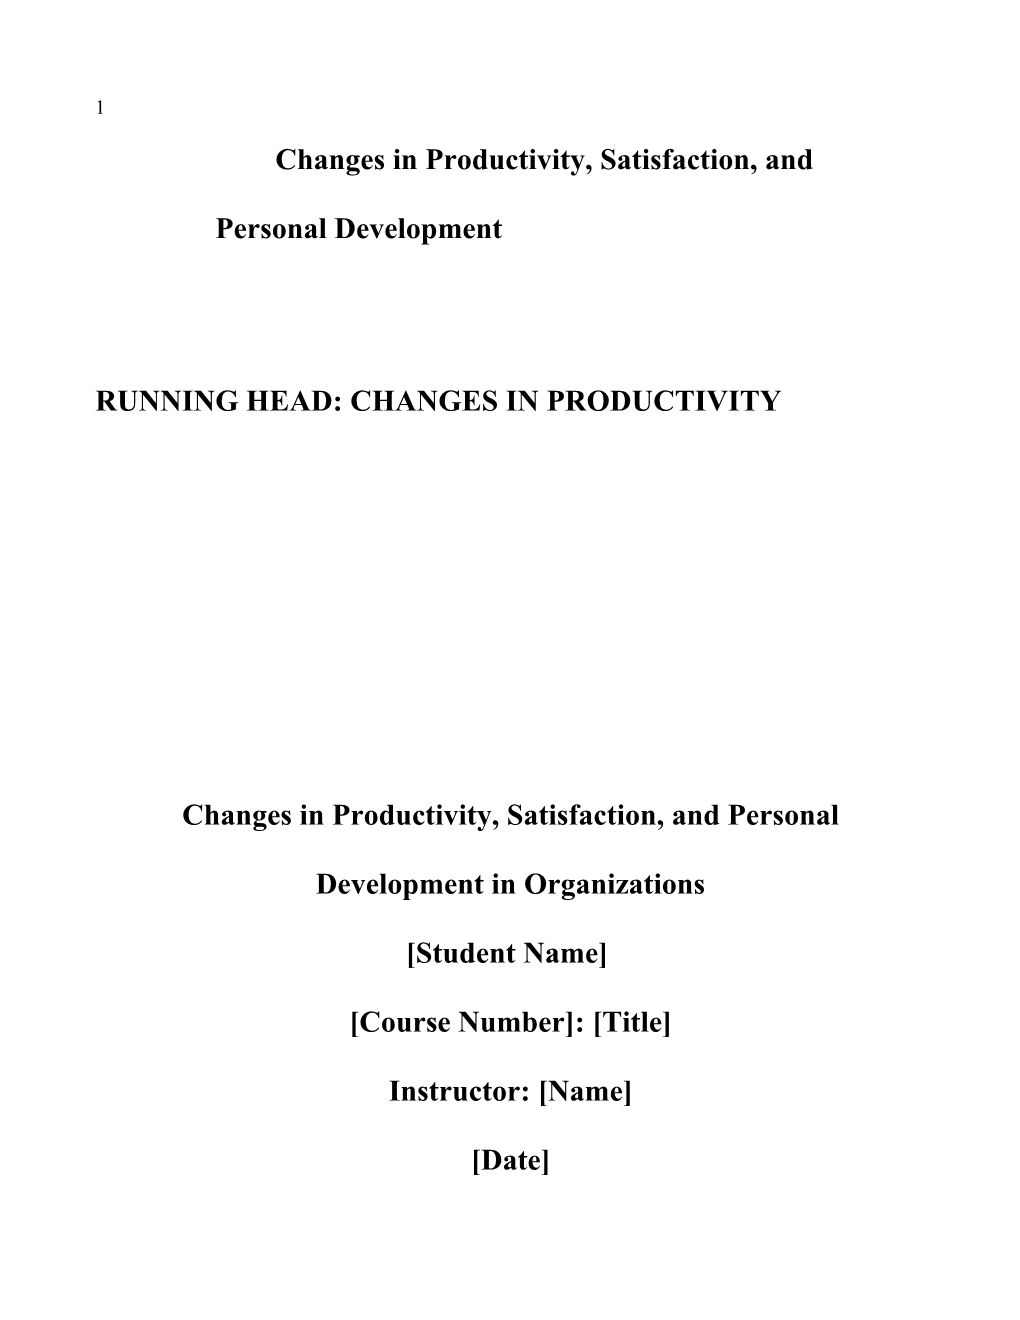 Changes in Productivity, Satisfaction, and Personal Development